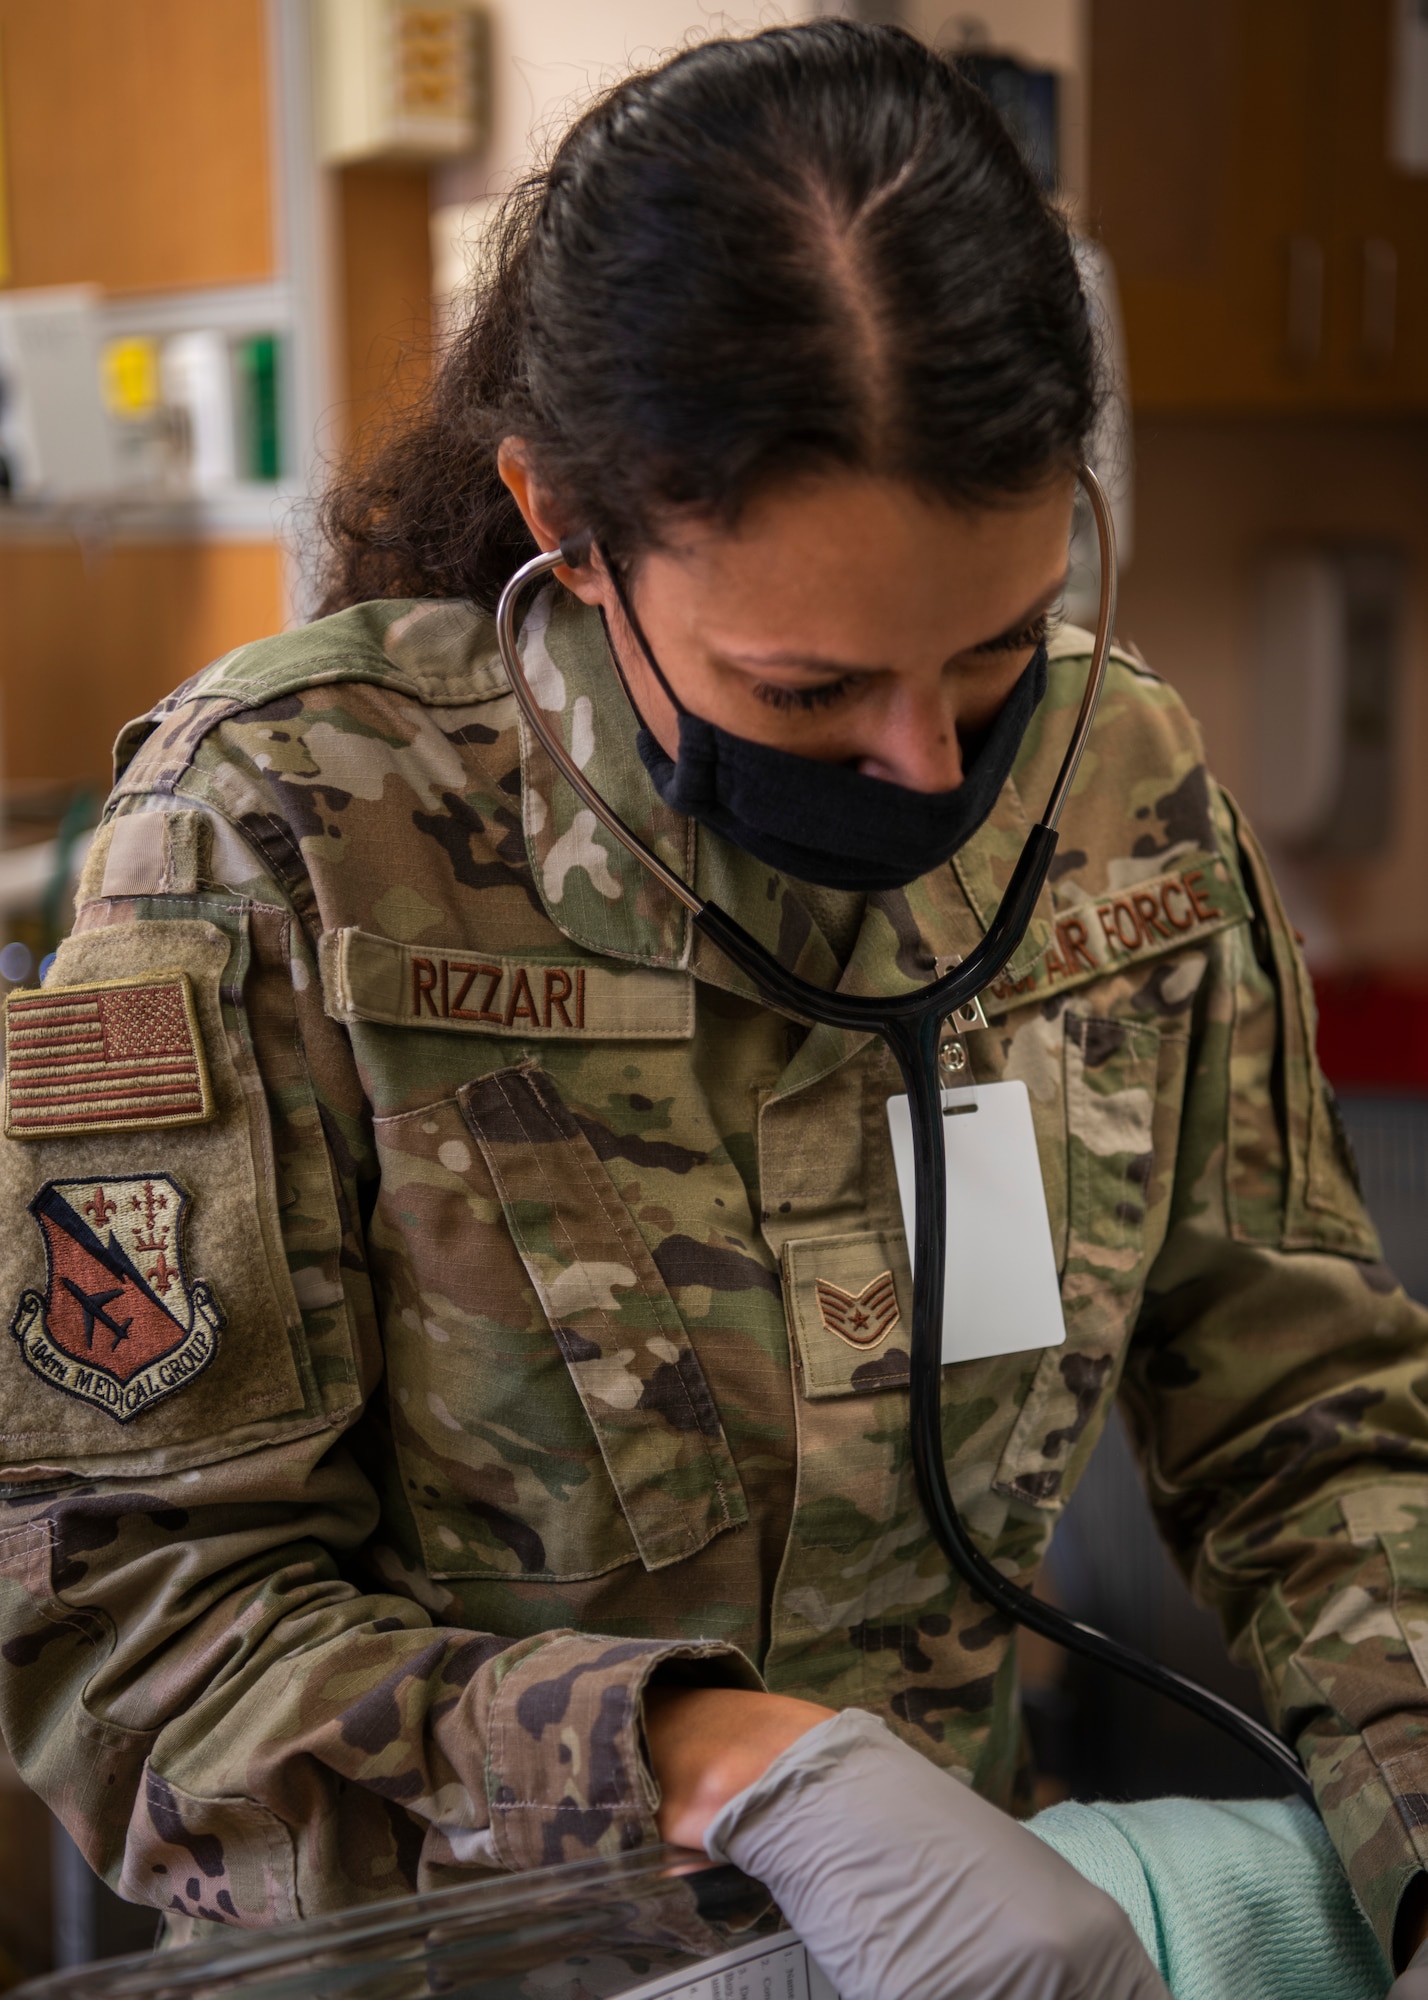 Staff Sgt. Daniella Rizarri, 104th Medical Group aerospace medical technician tends to an infant at Tripler Army Medical Center, Hawaii, May 3, 2022. Rizarii is at Tripler to provide medical support and complete training requirements. (U.S. Air National Guard Photo by 1Lt. Amelia Leonard)